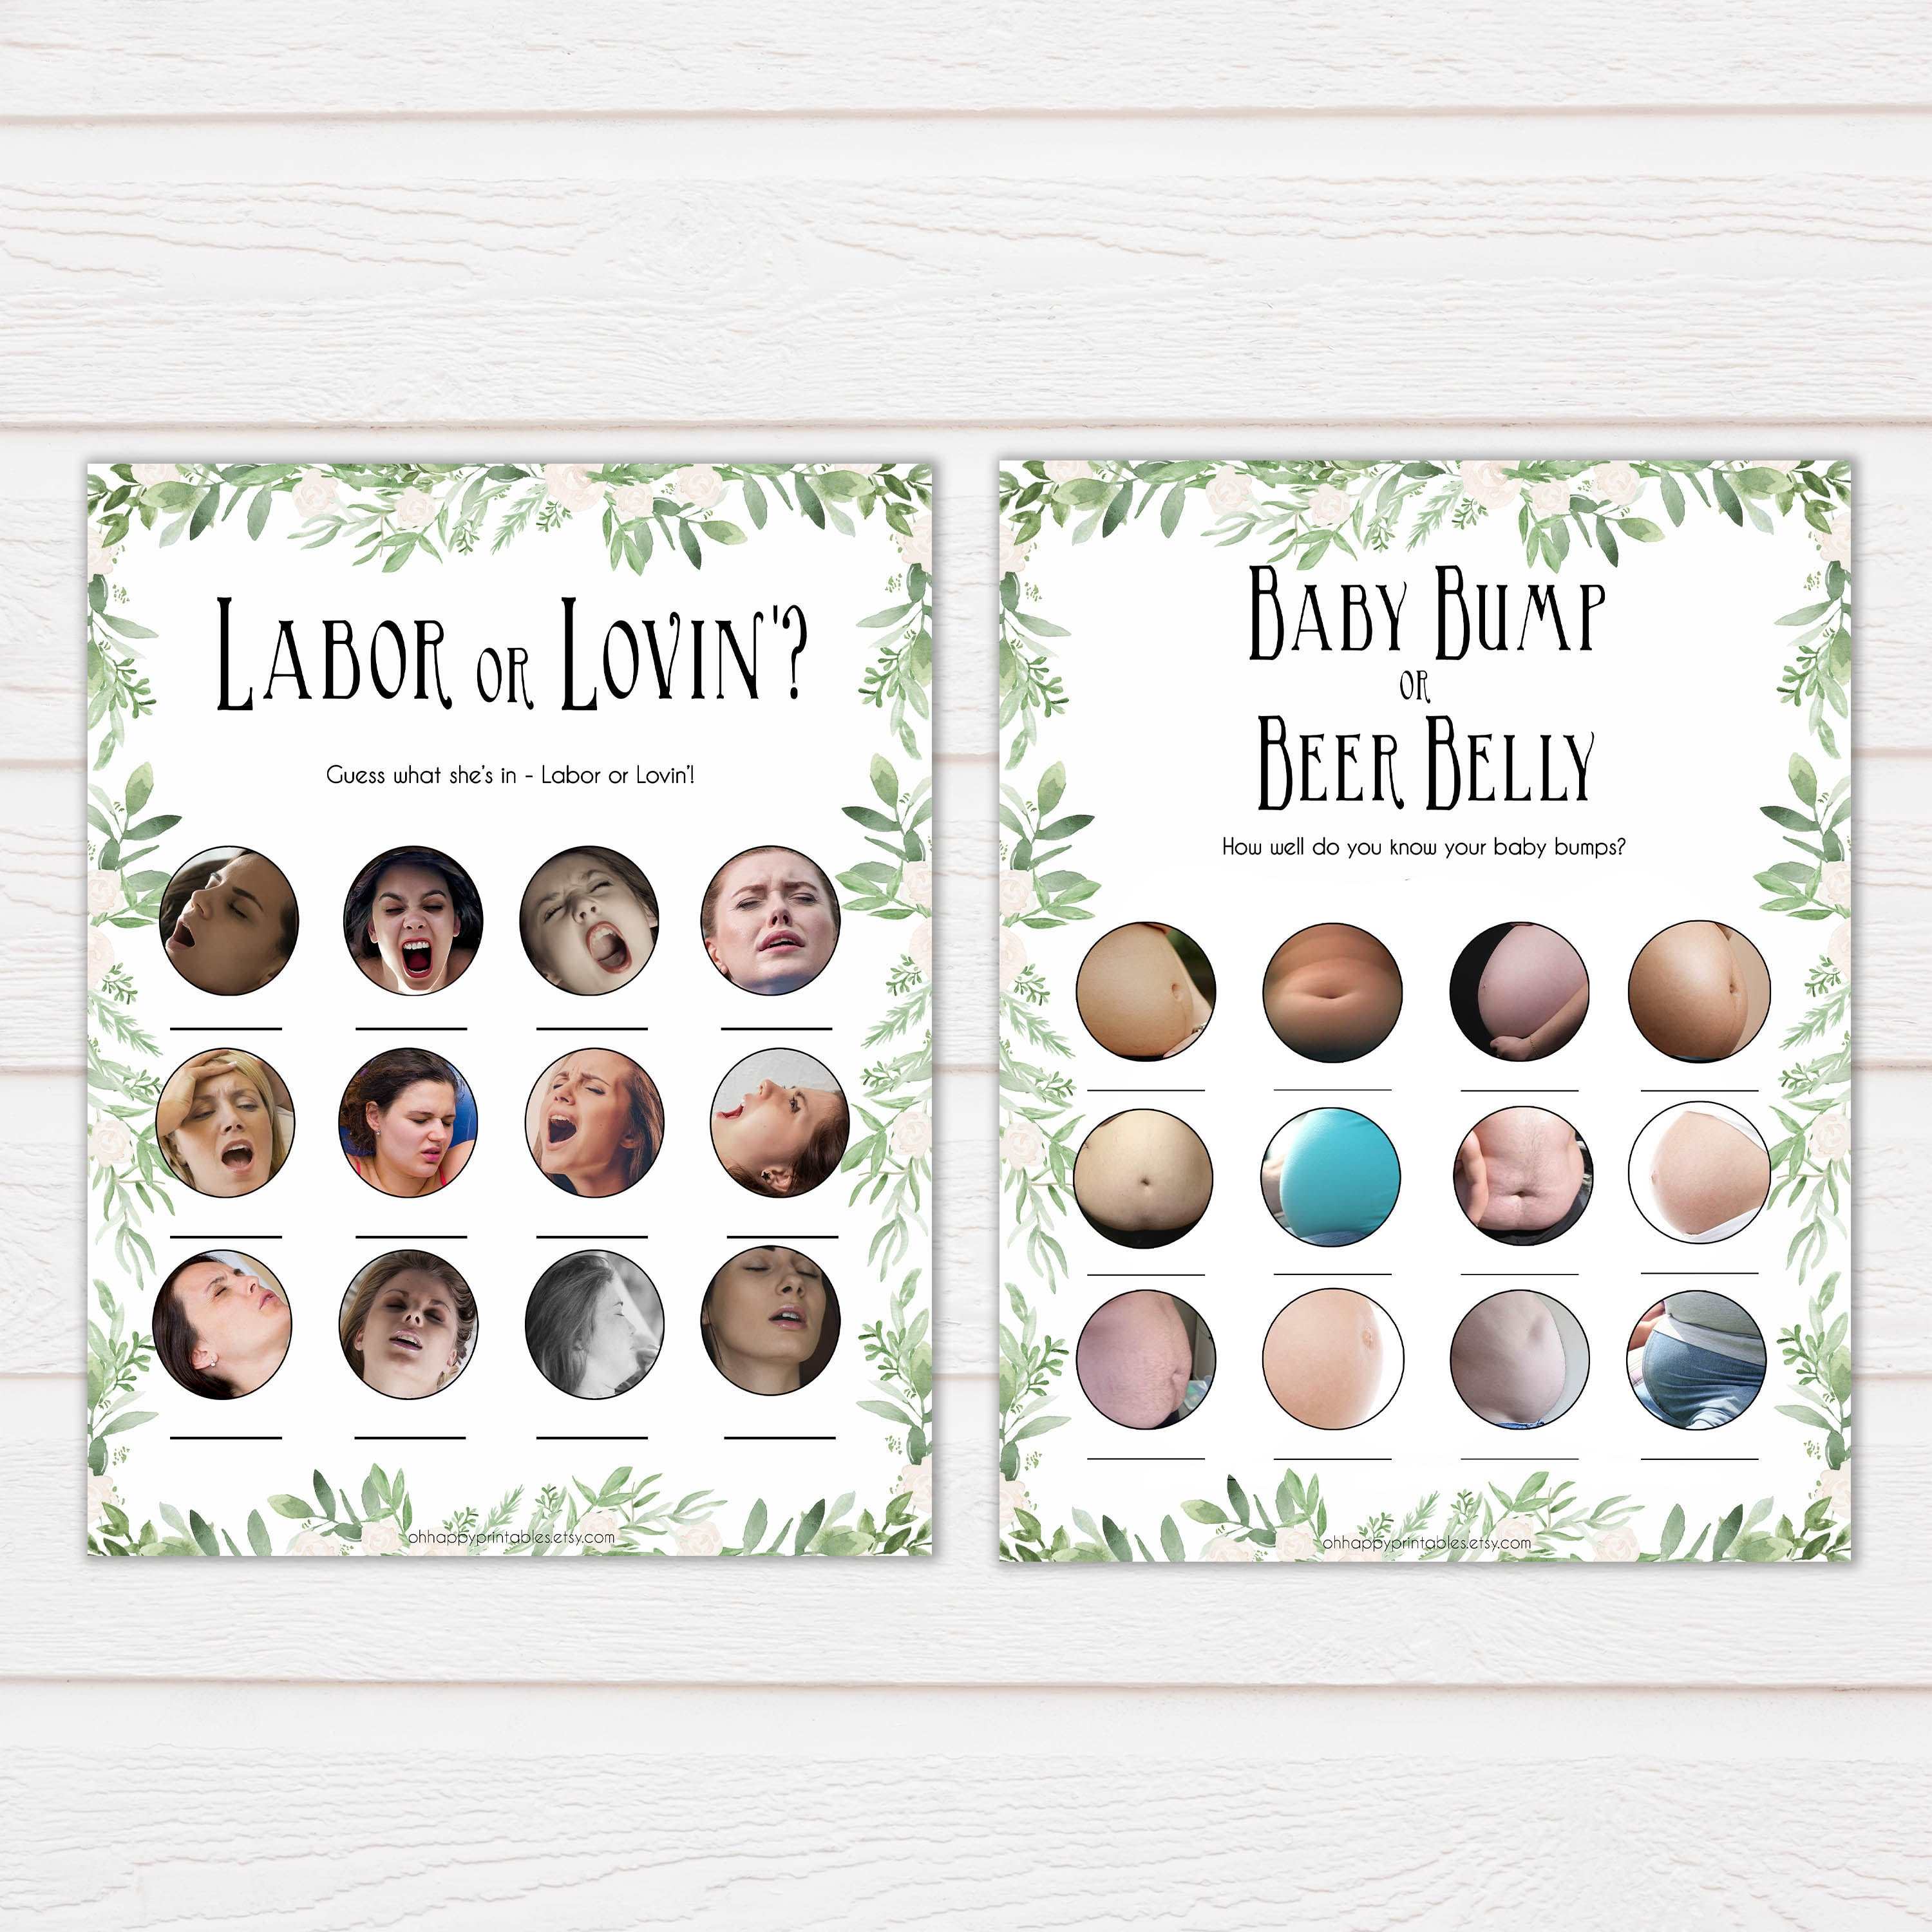 Greenery 10 Baby Shower Games, Printable Baby Shower Games, Baby Shower Games Pack, Green Baby Games, Baby Shower Pack, Baby Shower, printable baby shower games, fun baby shower games, popular baby shower games